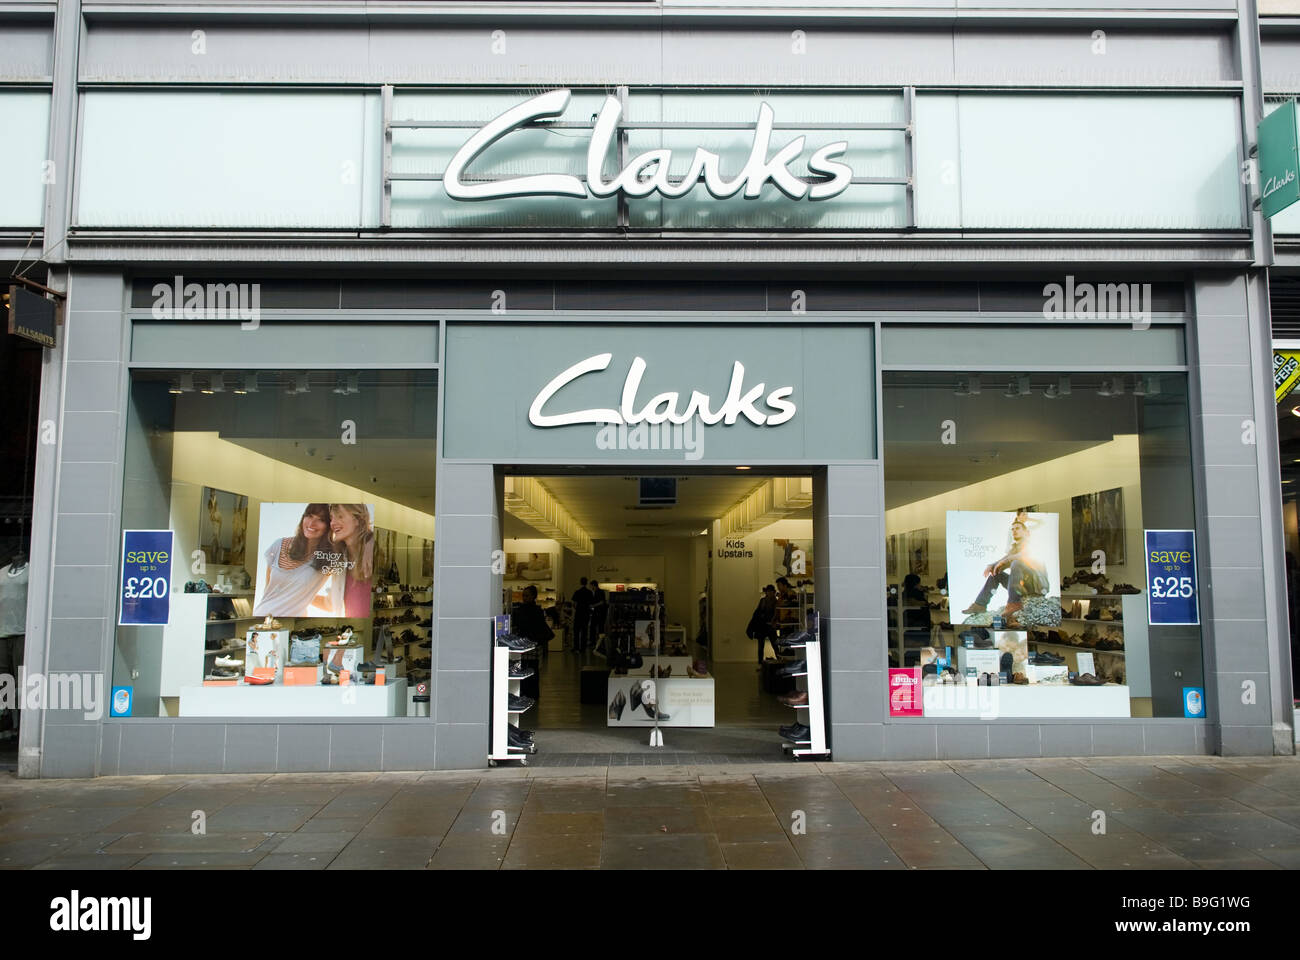 clarks street shoes